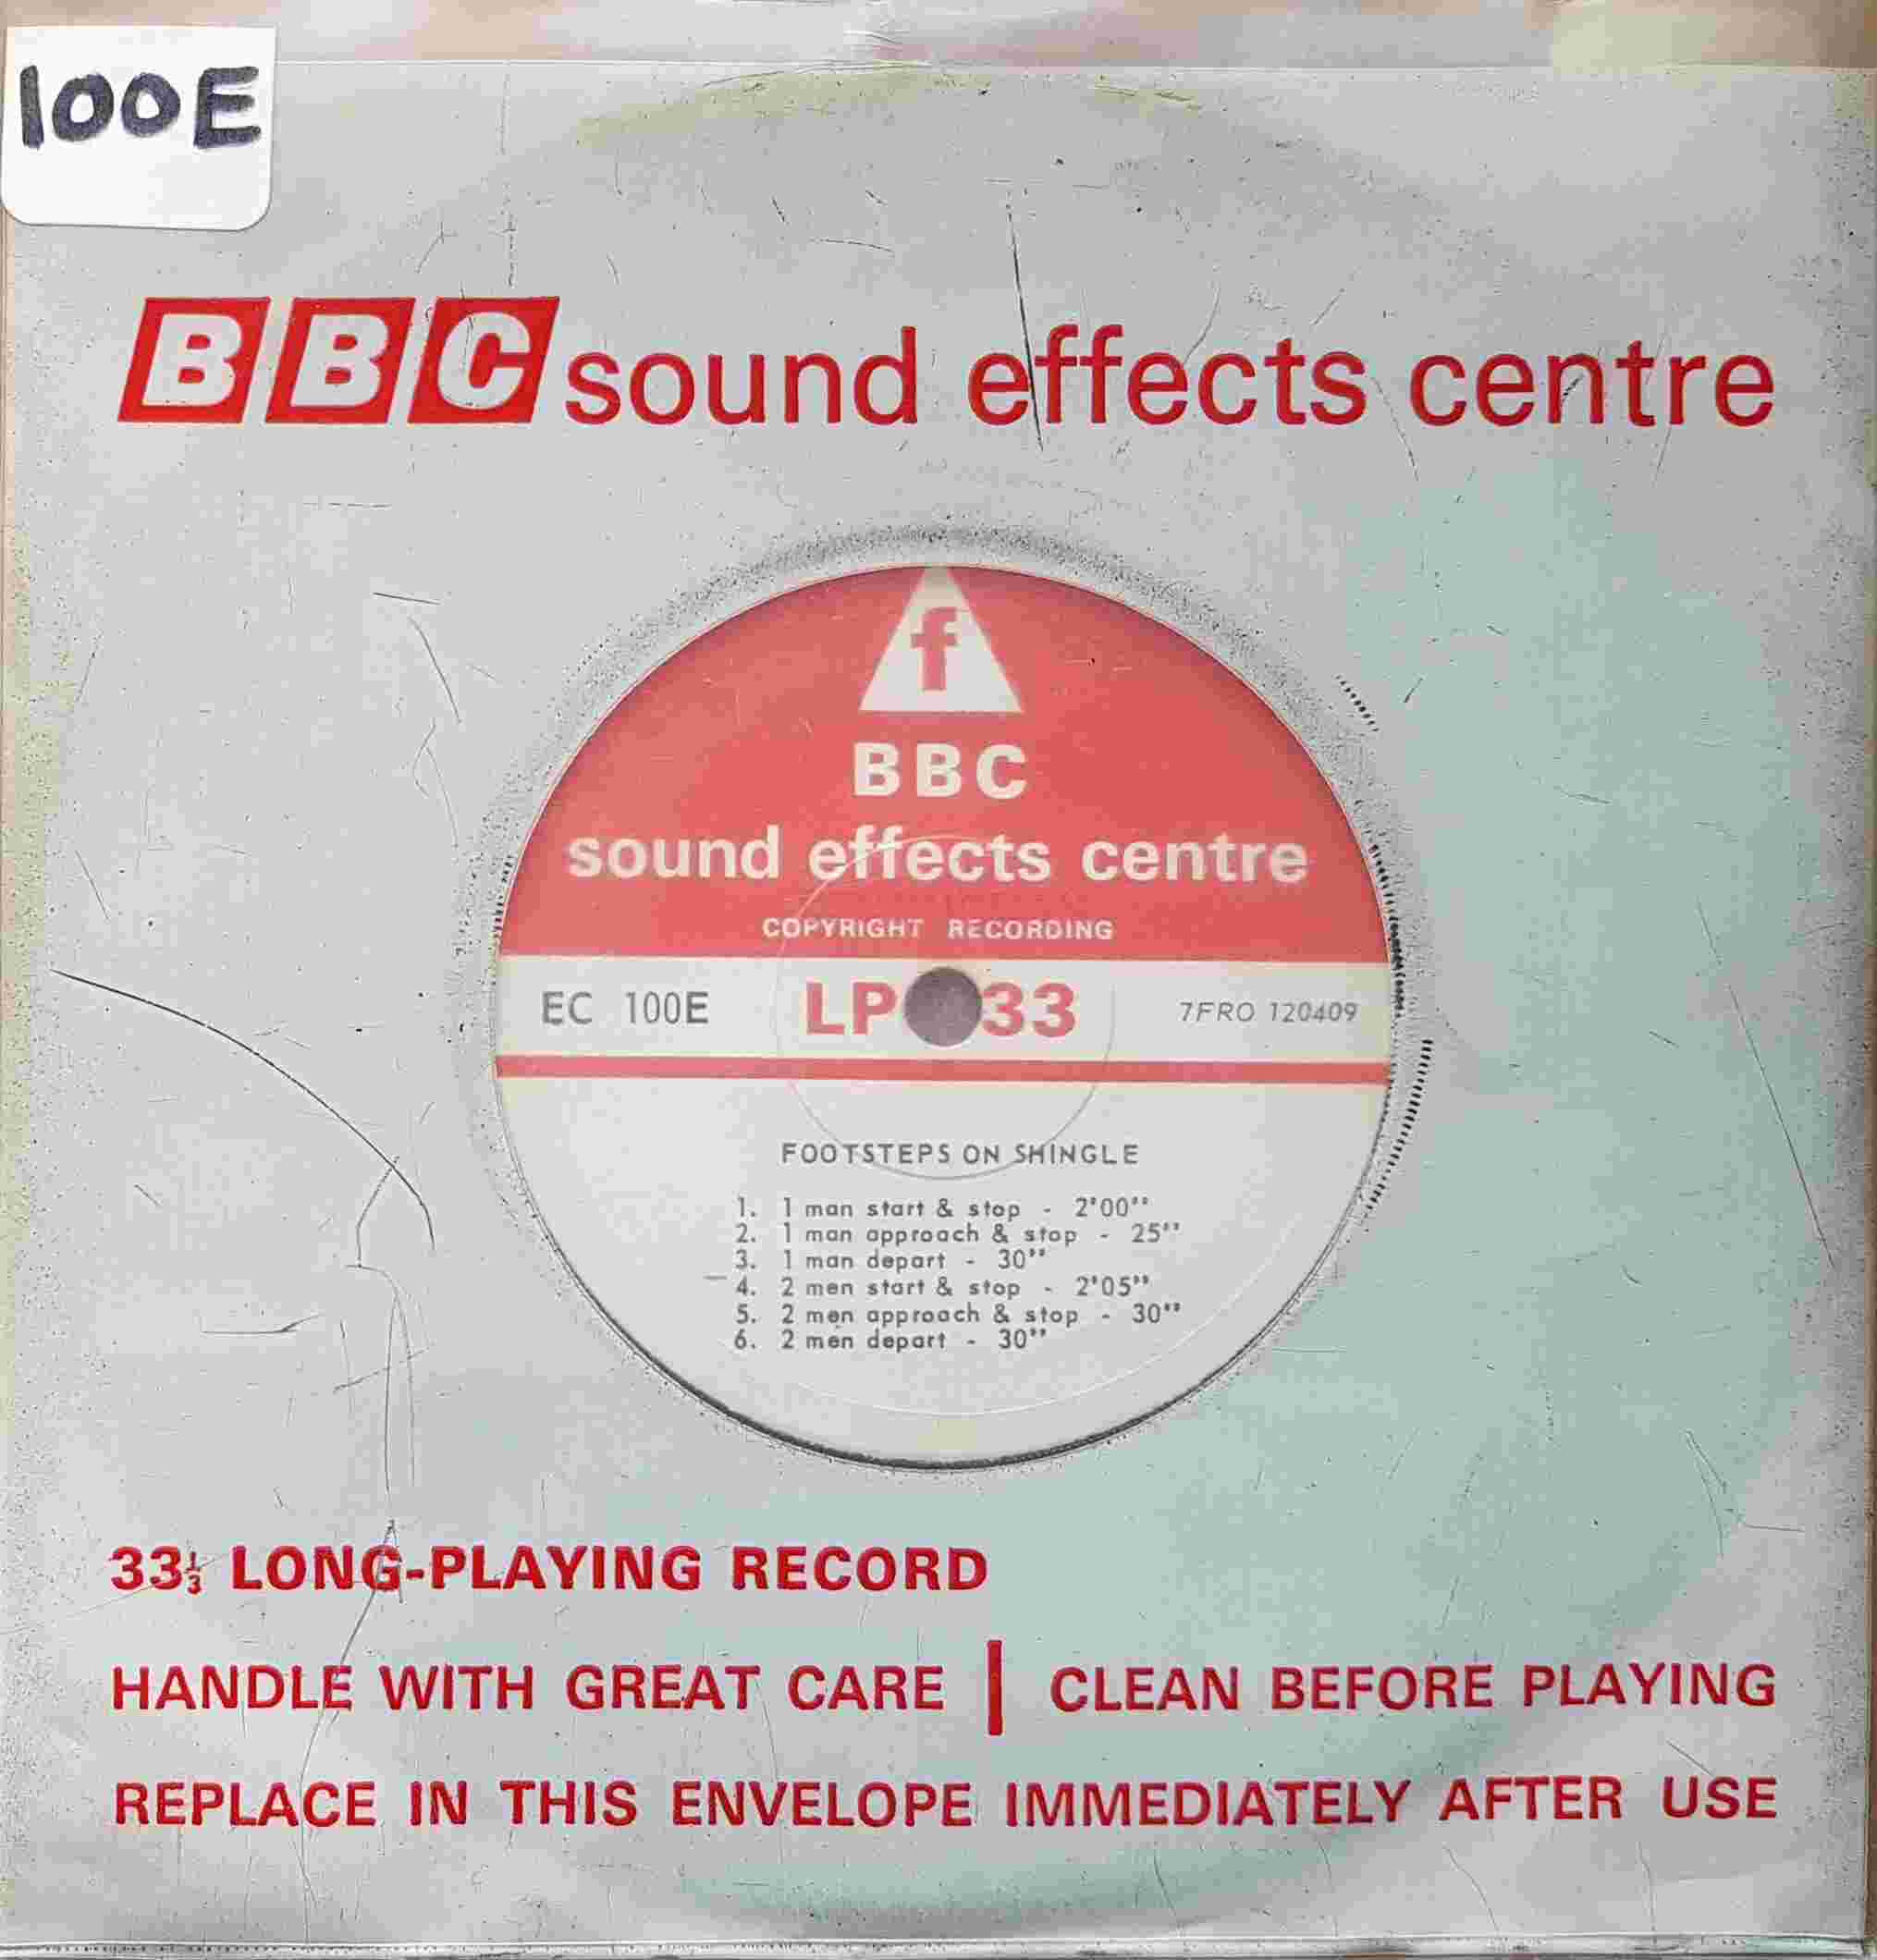 Picture of EC 100E Footsteps by artist Not registered from the BBC singles - Records and Tapes library